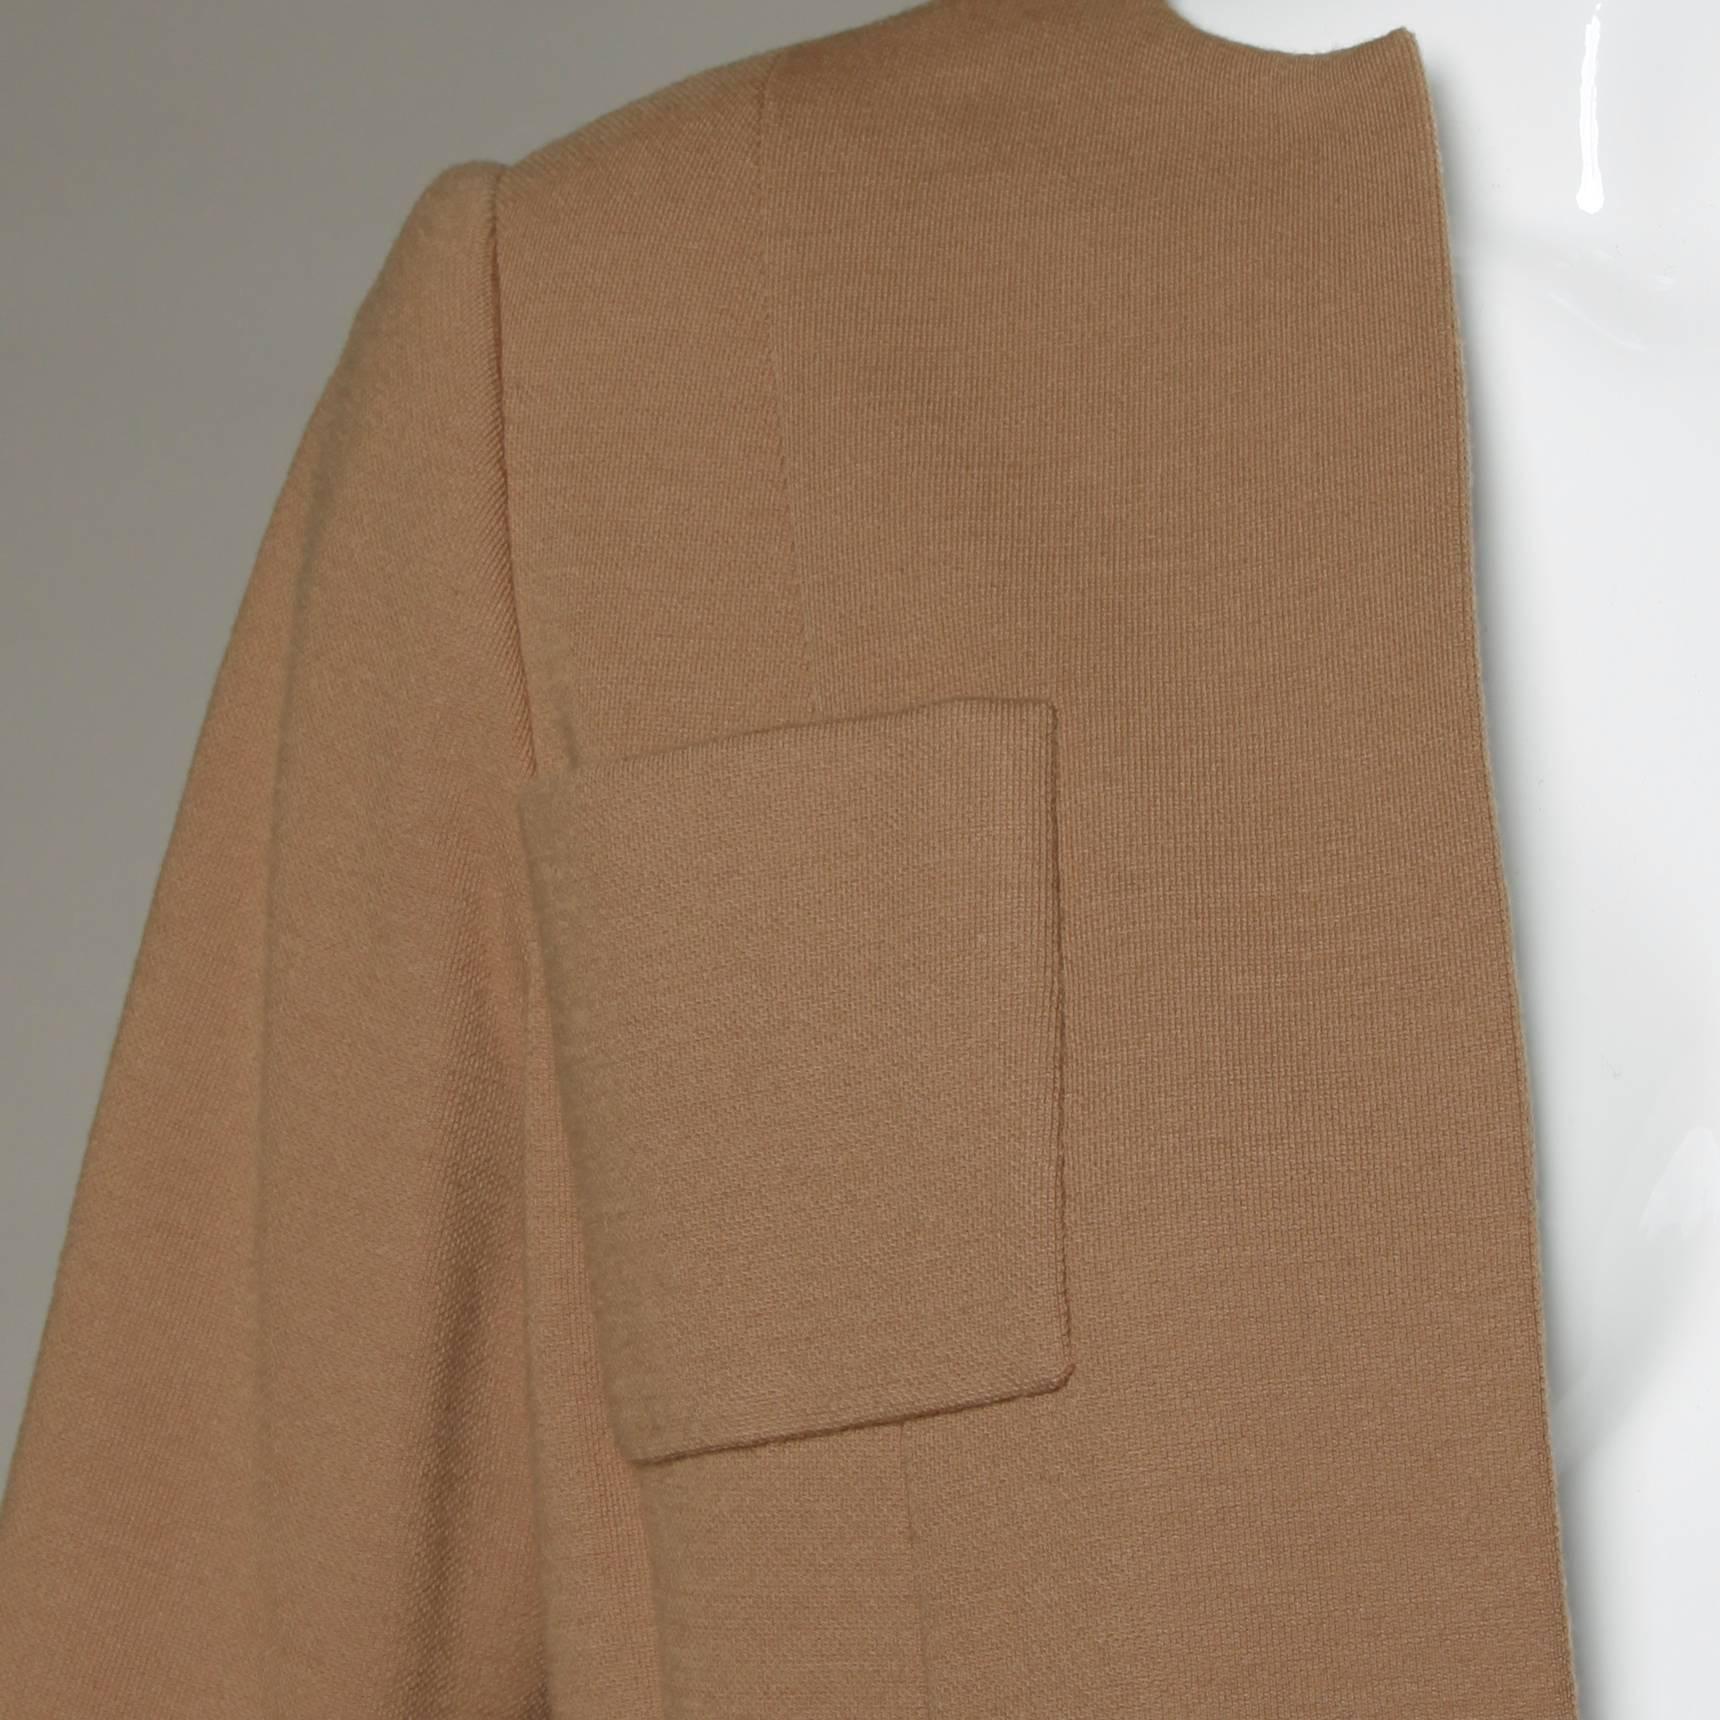  Stunning vintage Norman Norell vintage 1960s camel colored wool jacket with four front patch pockets. Fully lined in gorgeous quality silk fabric. Hand stitched couture finishing throughout the piece. 

Details:

Fully Lined
Front and Side